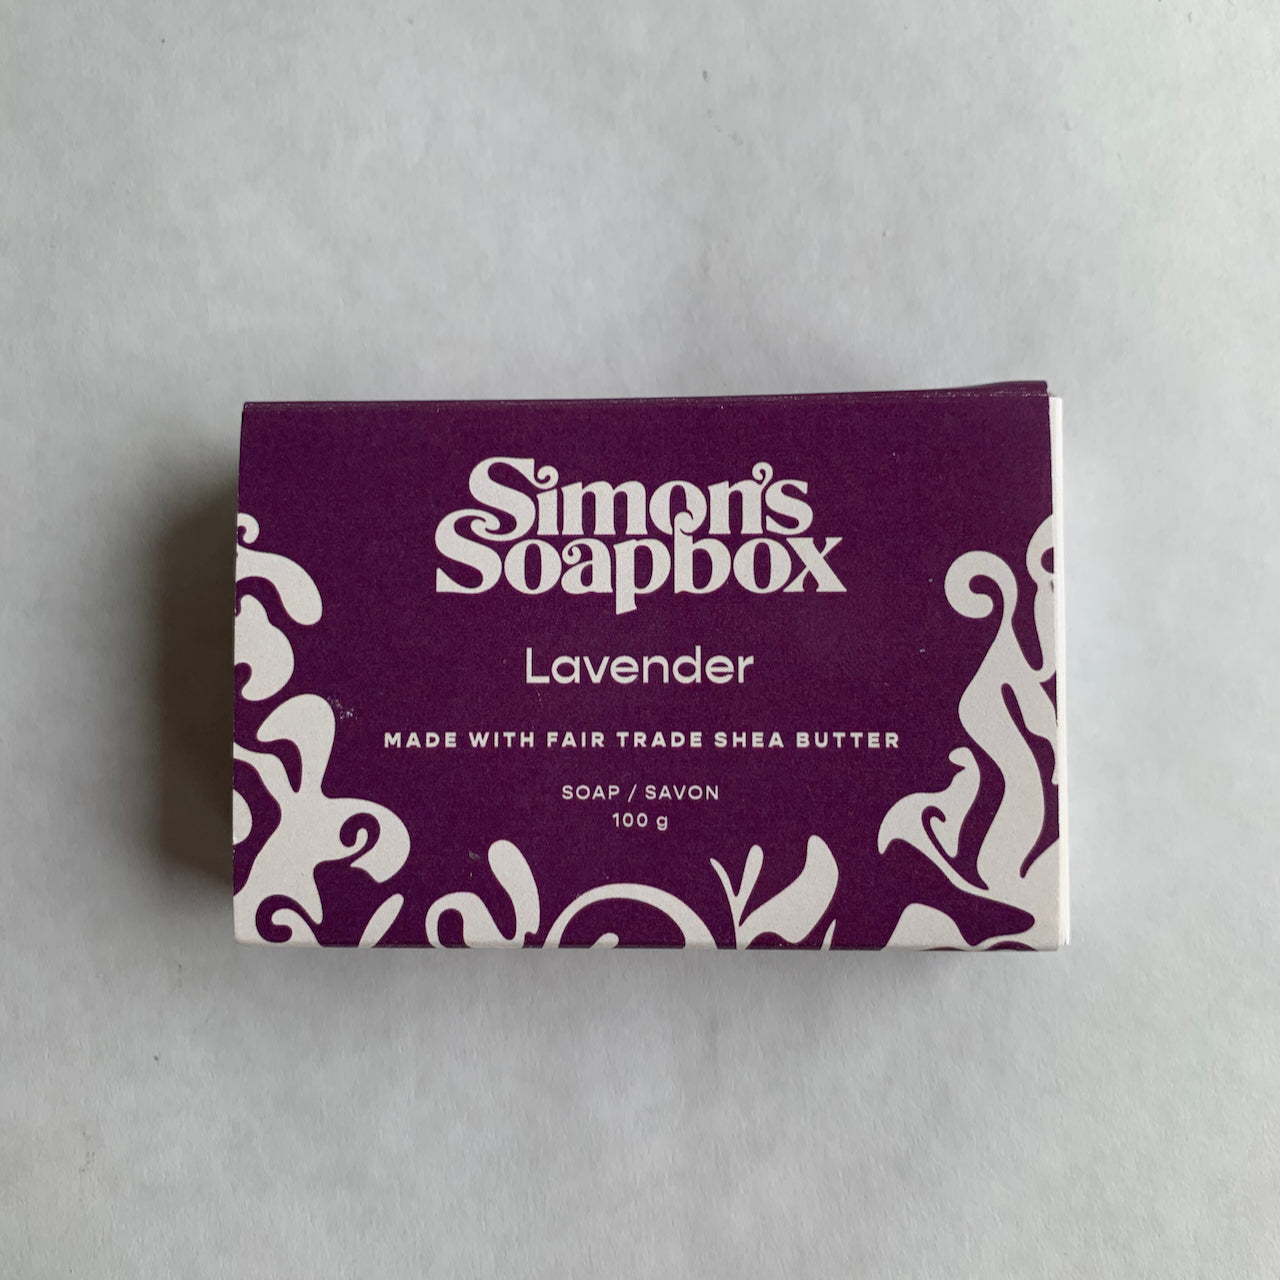 purple package that reads Simon's Soapbox Lavender made with fair trade shea butter soap/savon 100 g